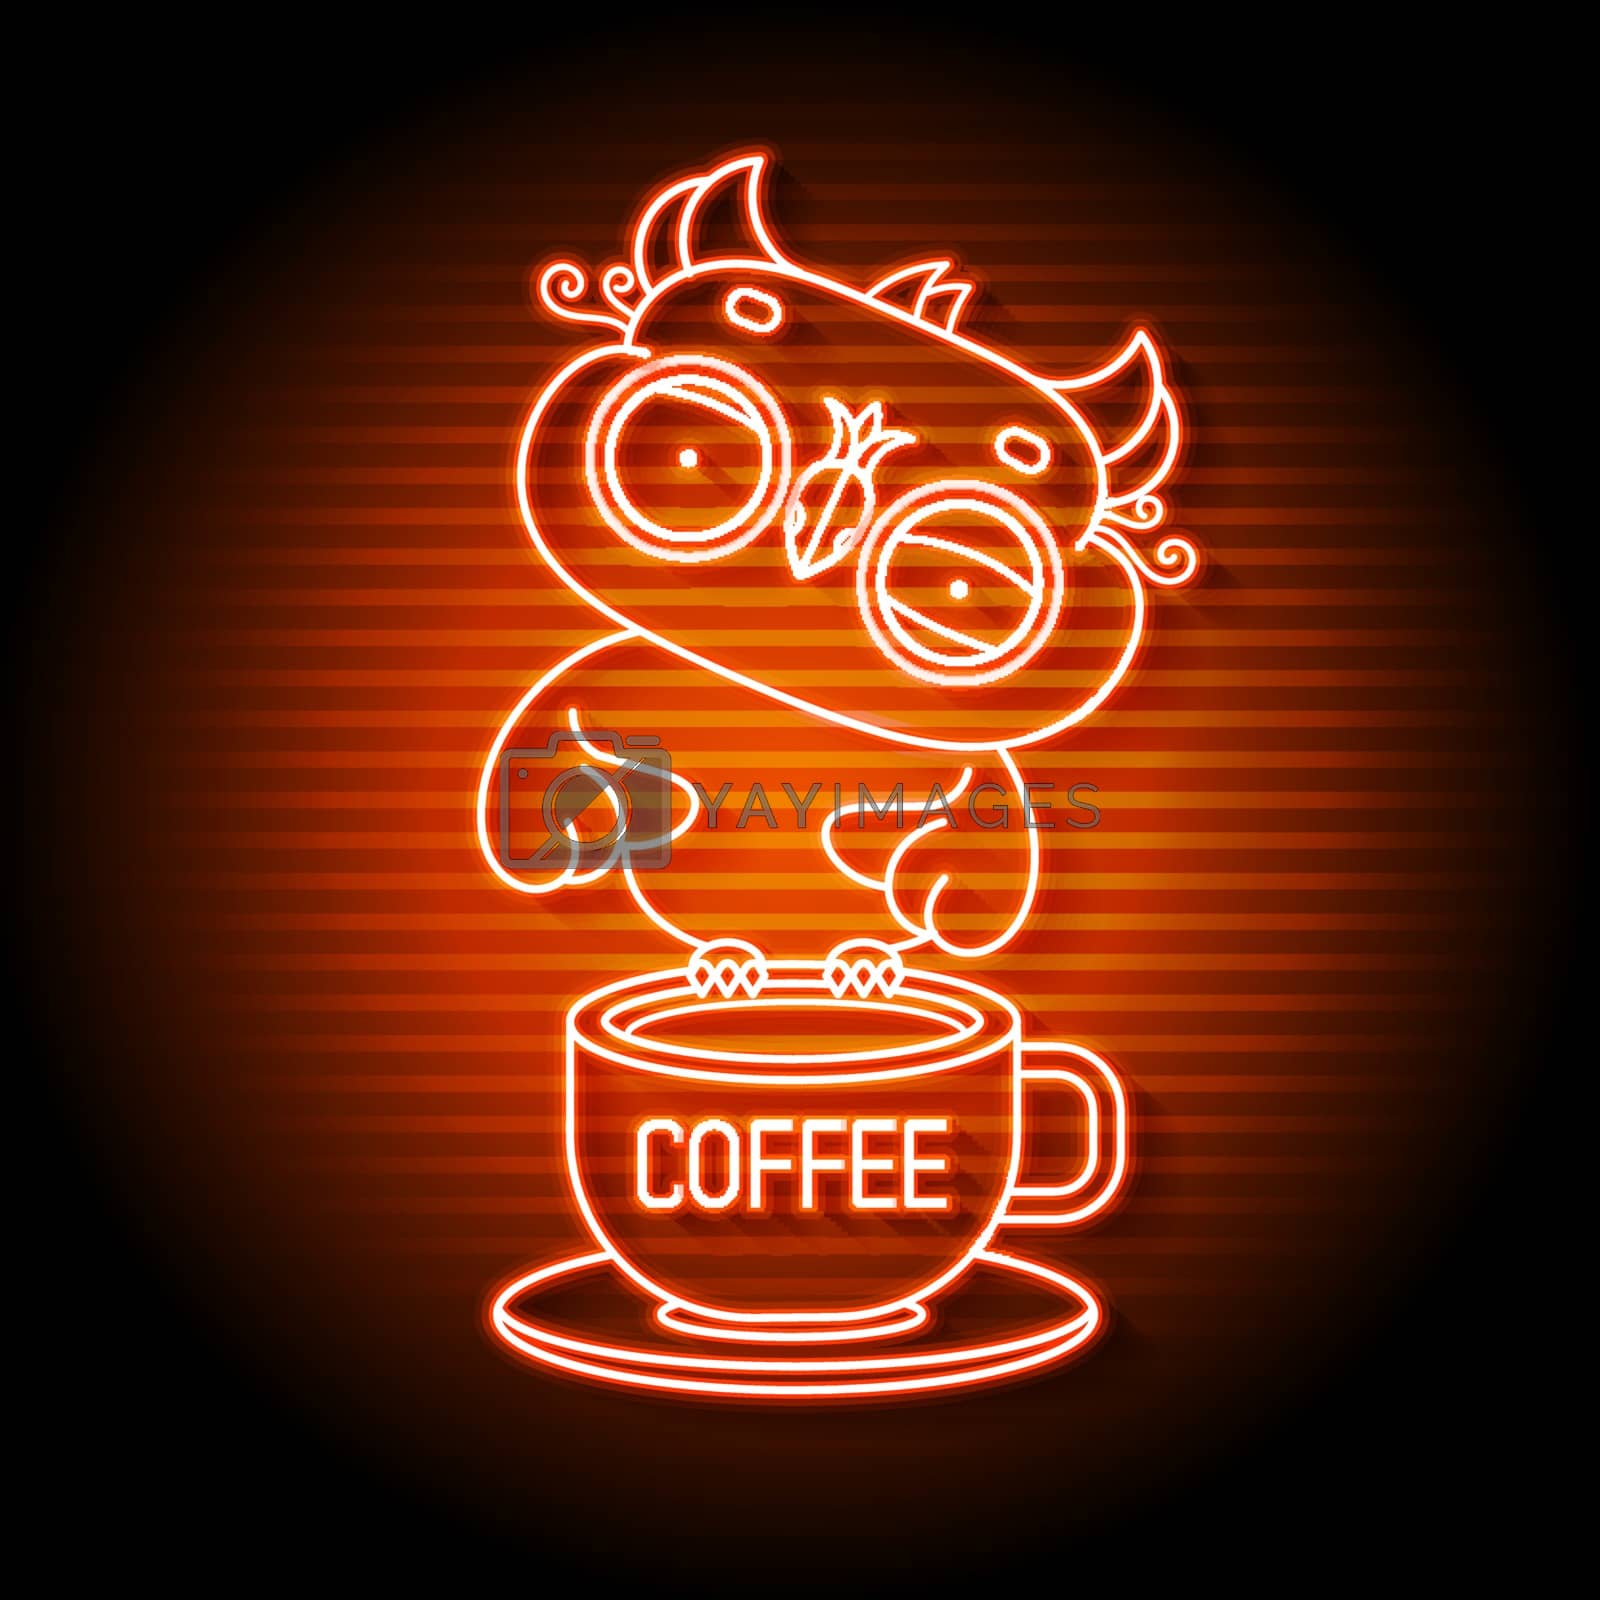 Royalty free image of An Owl On A Neon Book Sign. Smart Owl With A Coffee Mug Night Bright Advertising. Vector Illustration In Neon Style For Education by IaroslavBrylov